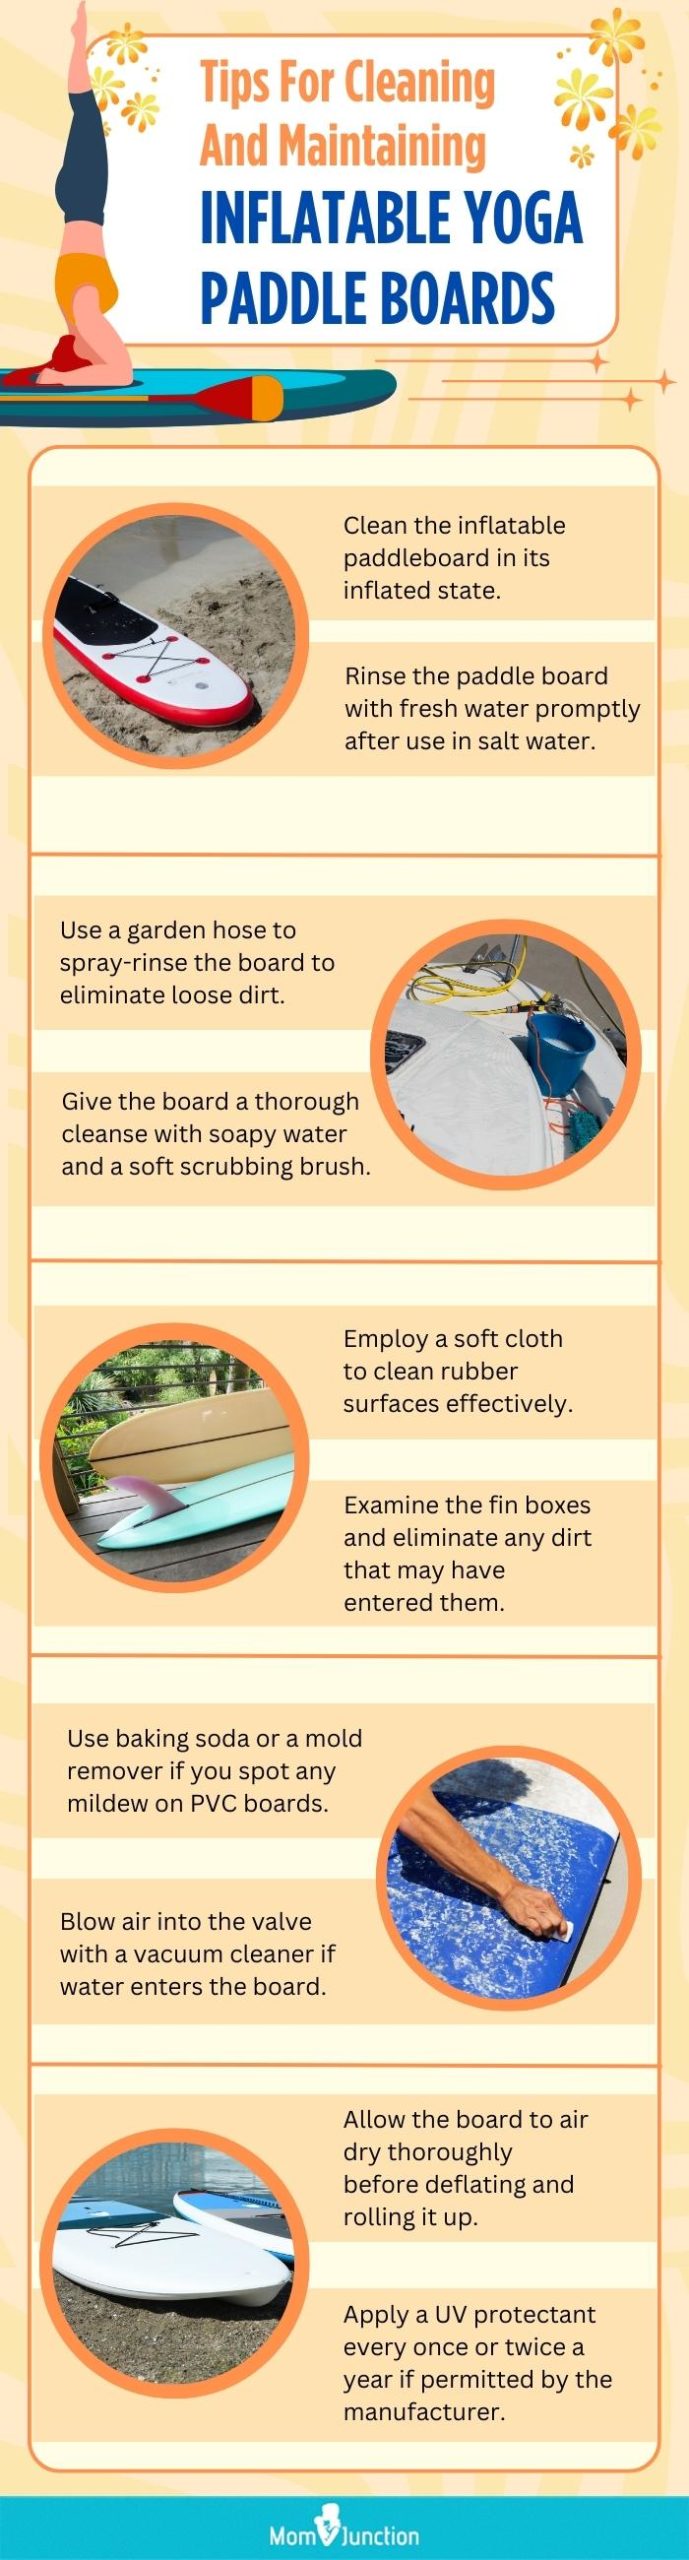 Tips For Cleaning And Maintaining Inflatable Yoga Paddle Boards (infographic)